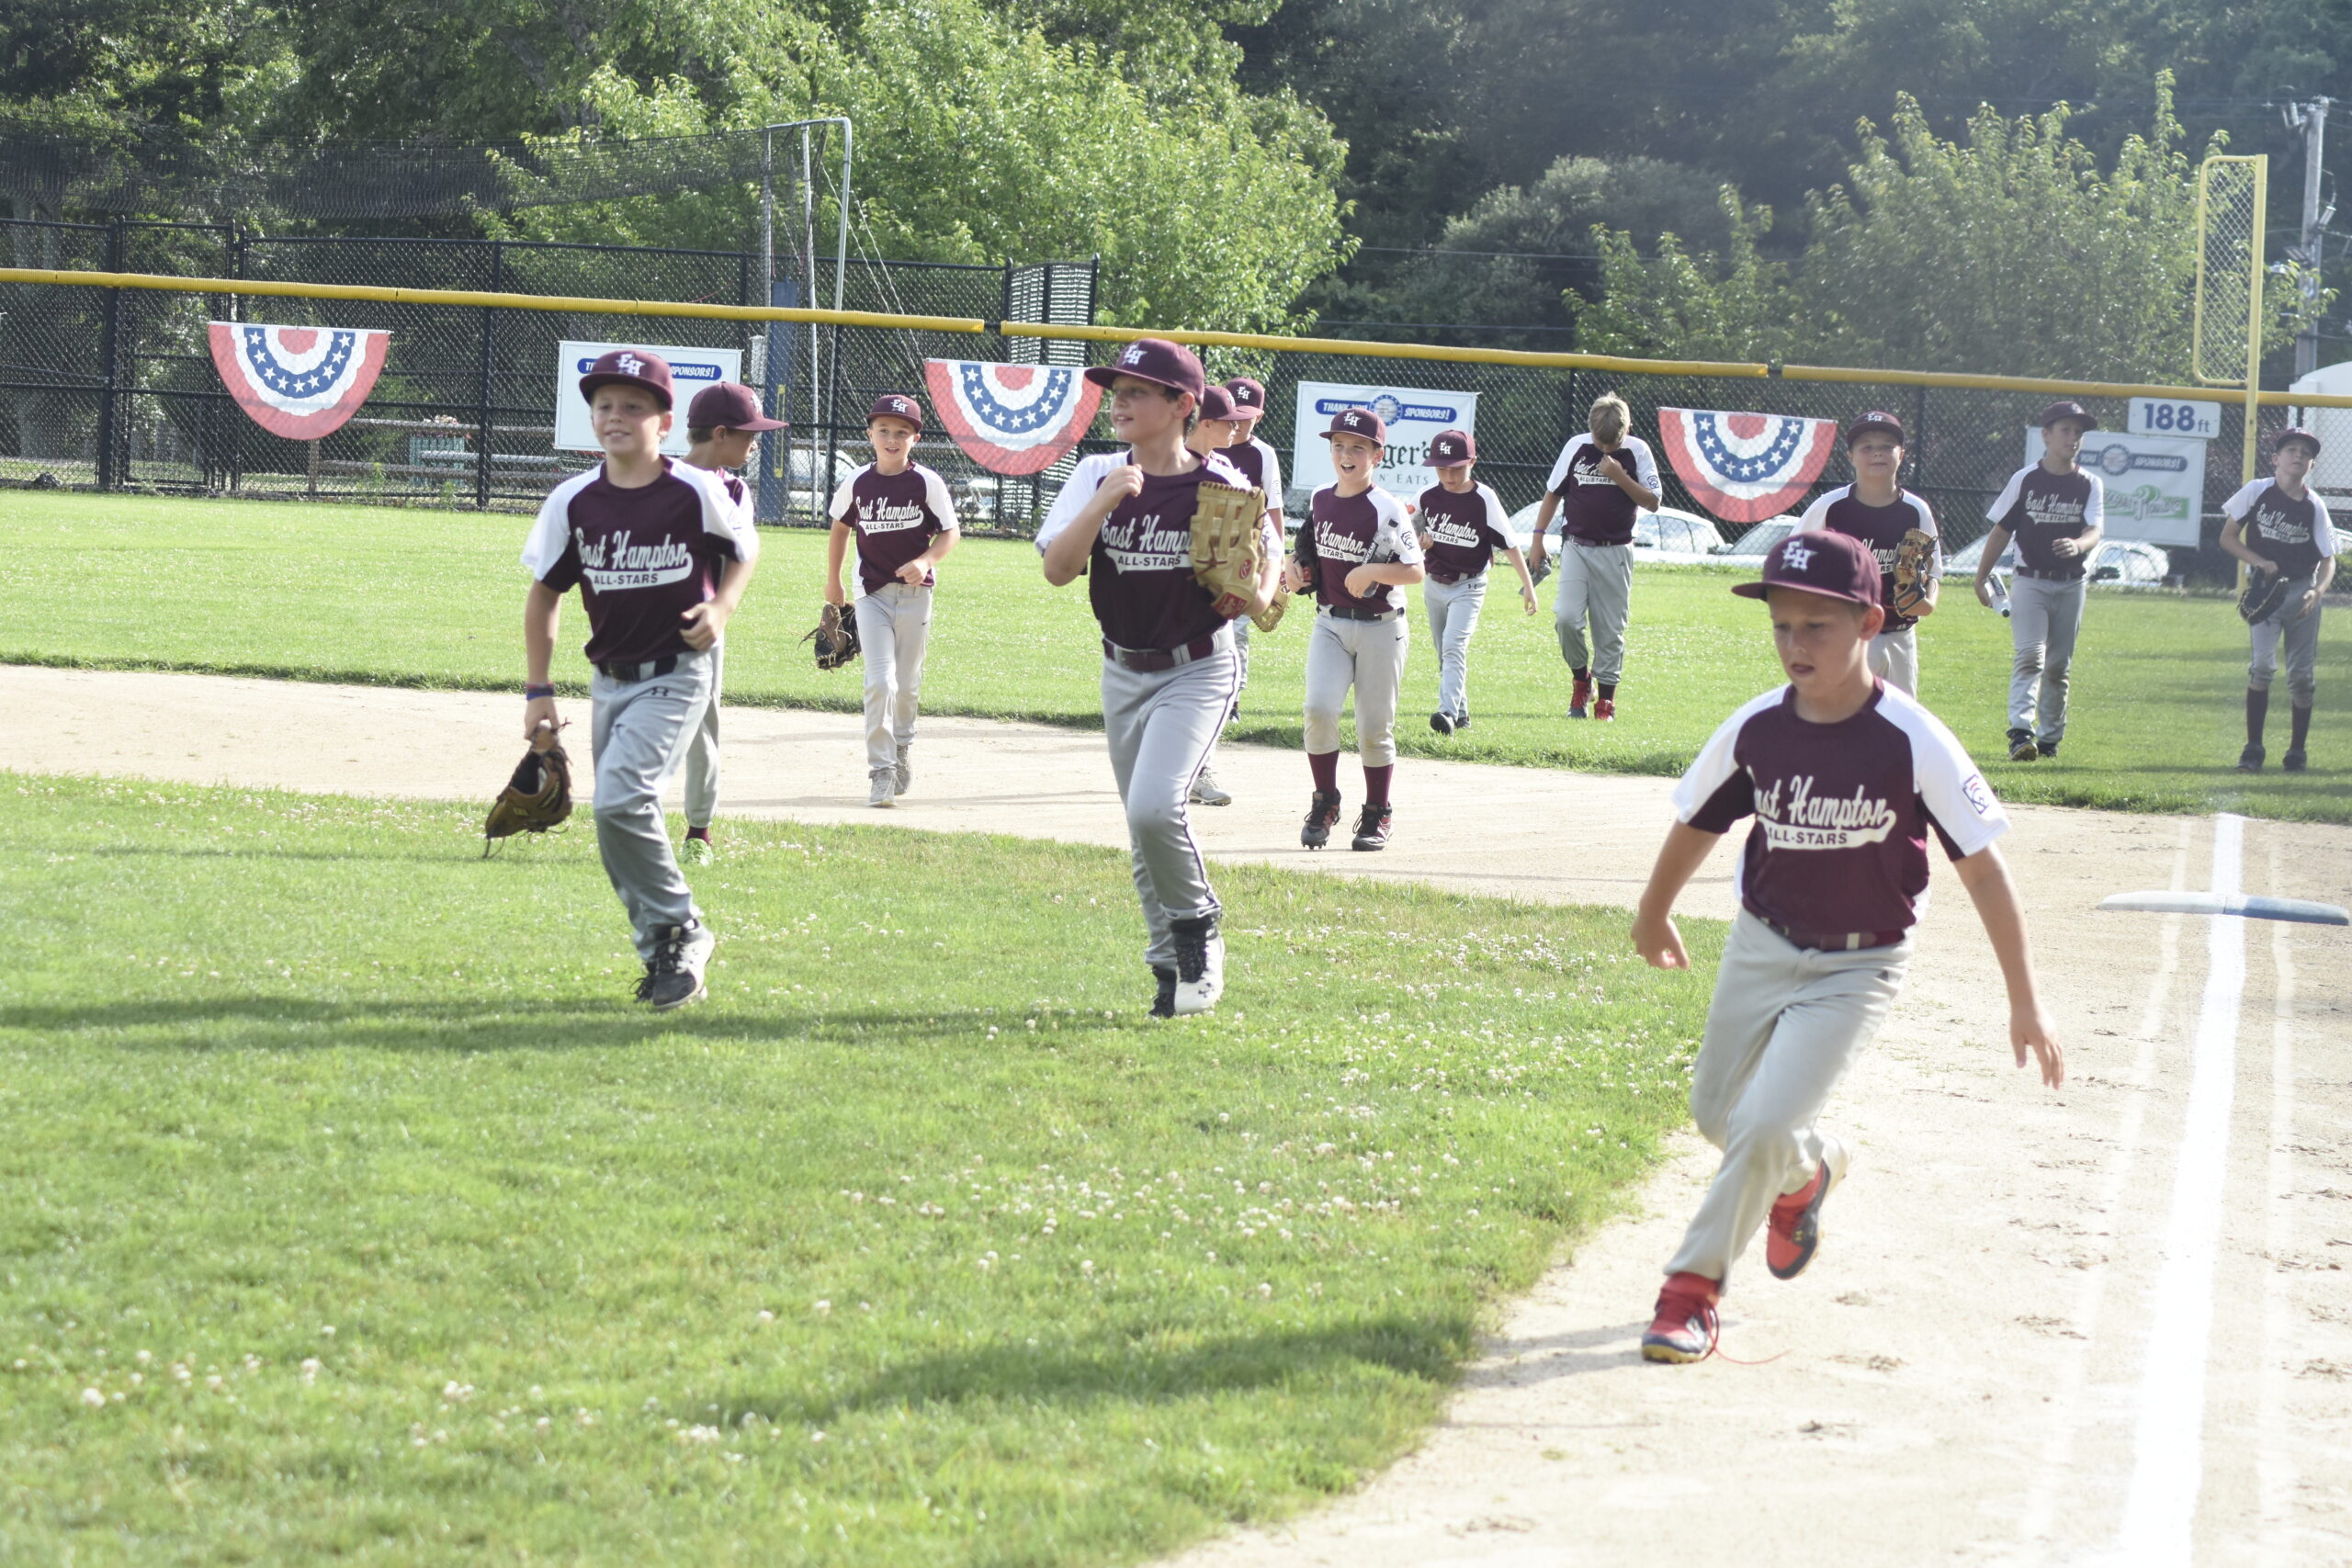 The East Hampton Minors All-Stars race to their dugout just prior to their game on July 6.   DREW BUDD